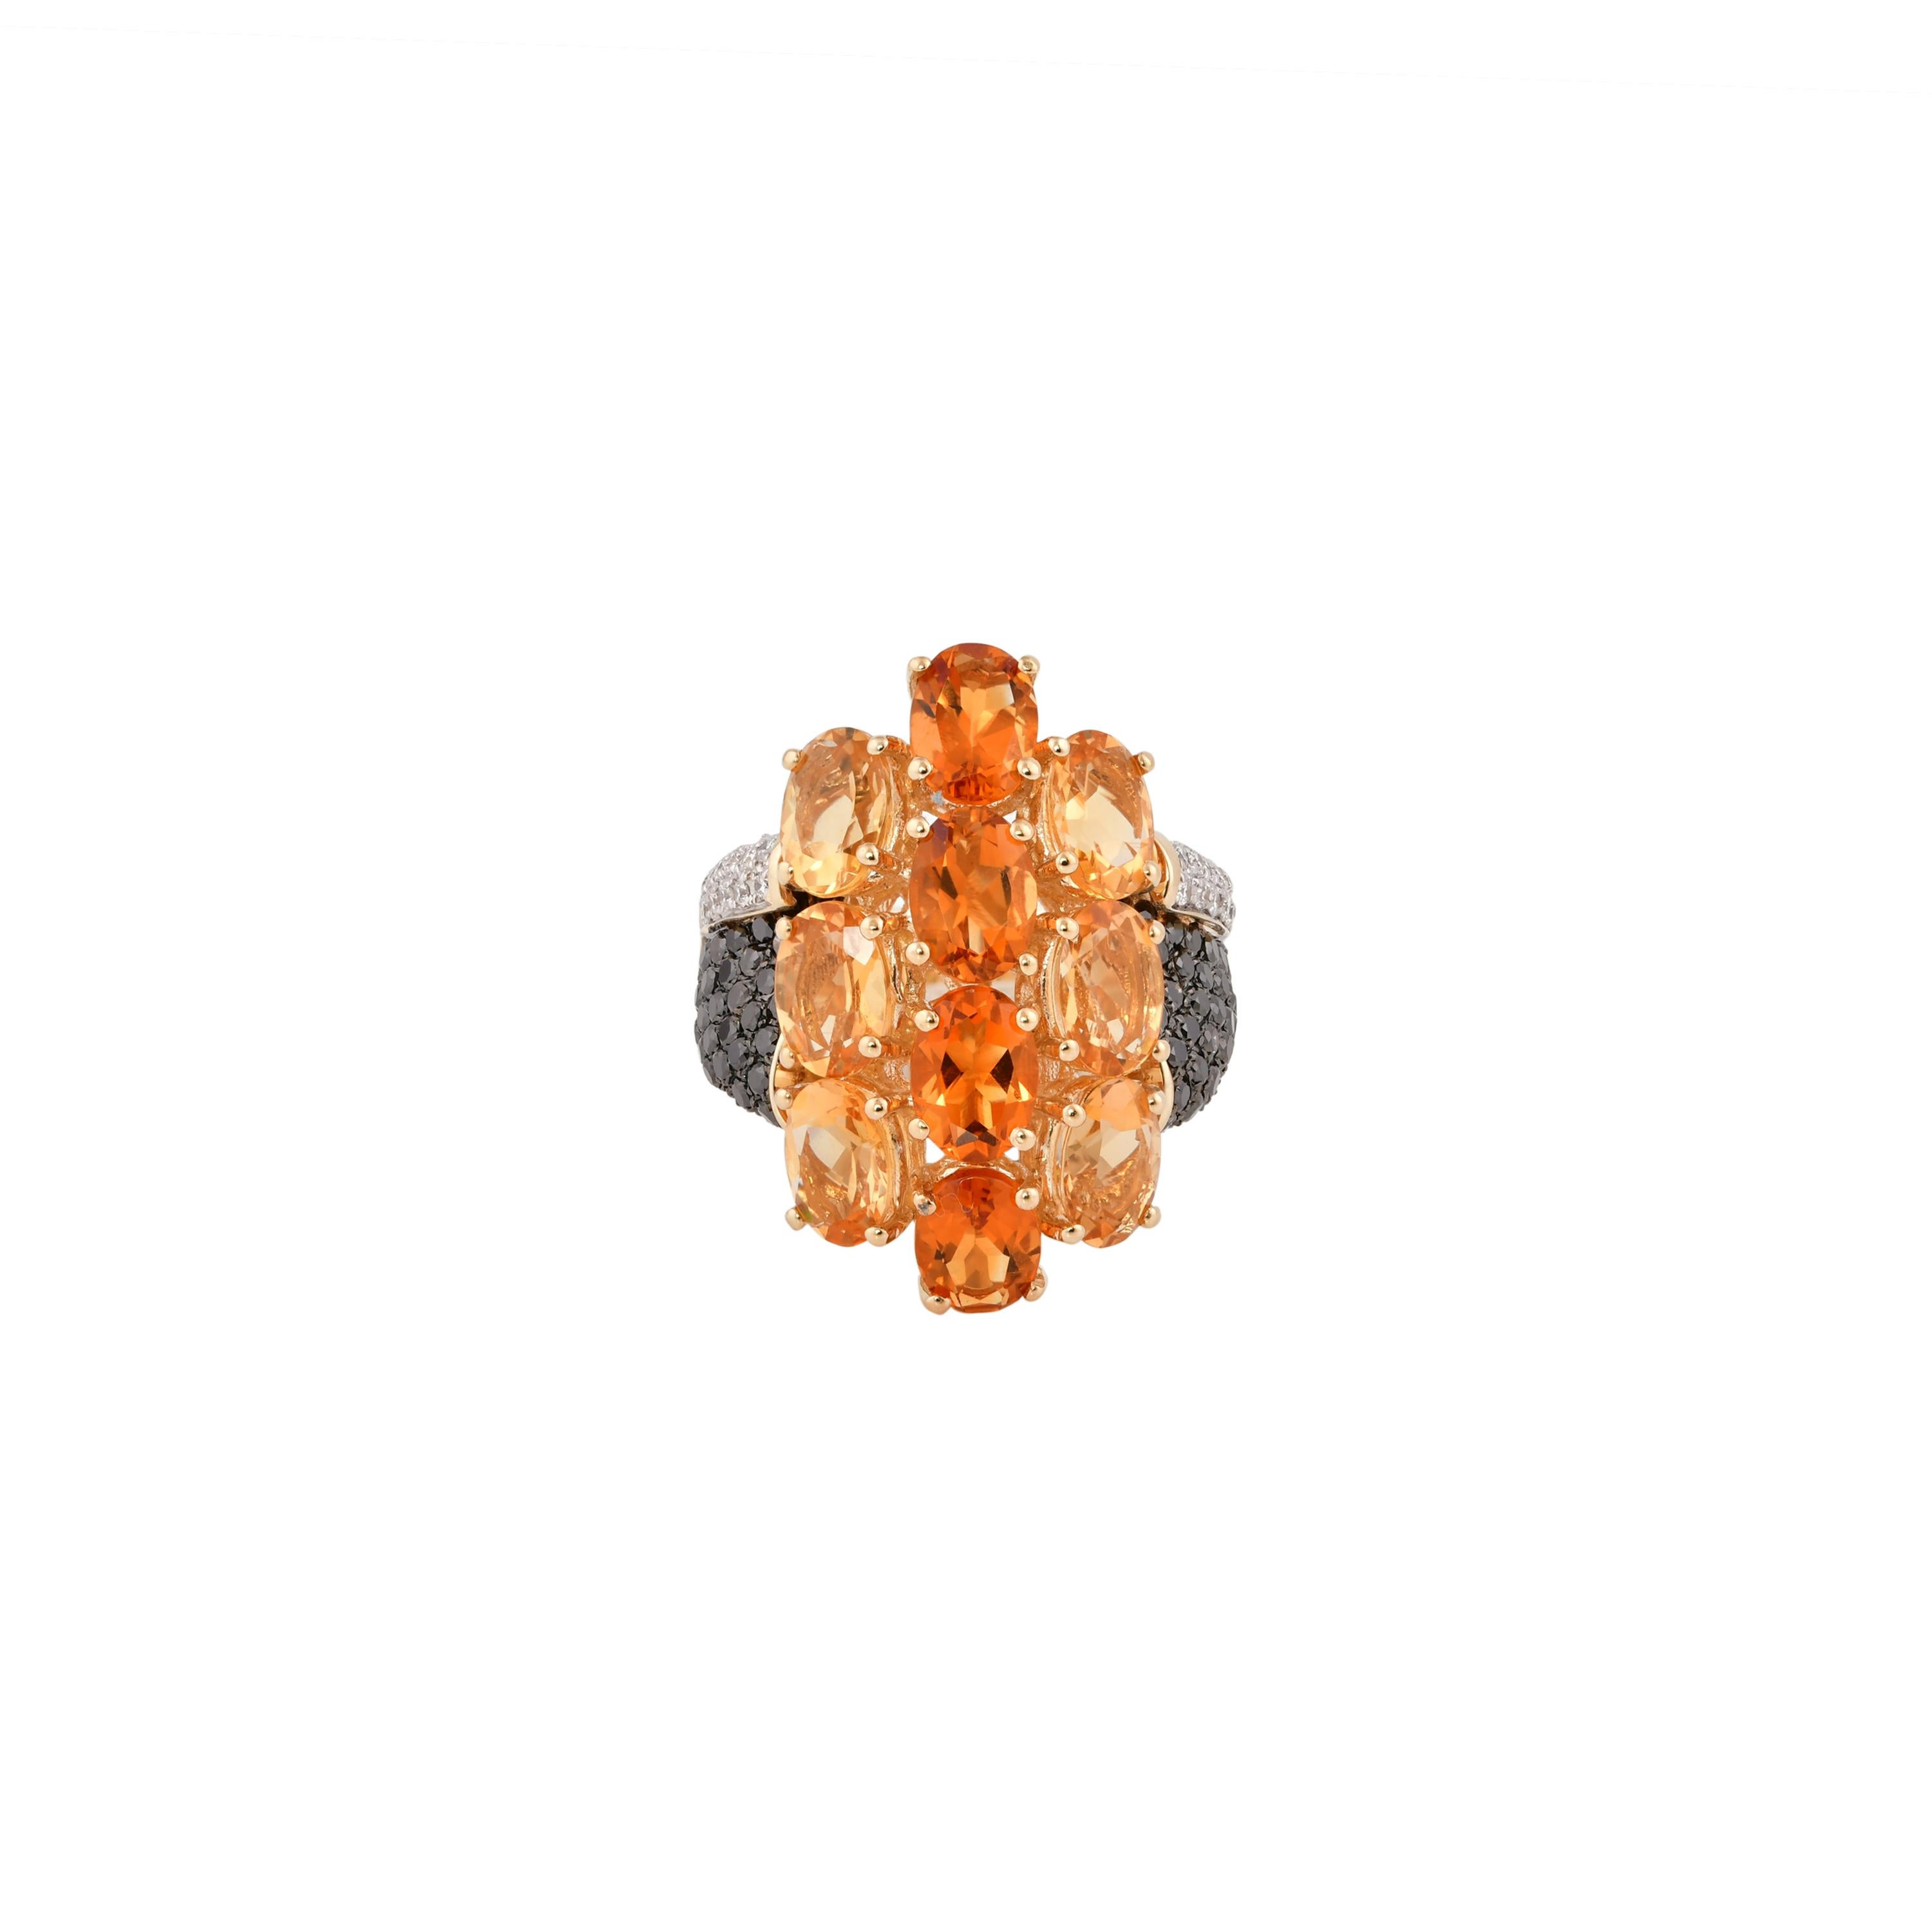 Contemporary 6.5 Carat Citrine with Black and White Diamond Ring in 14 Karat Yellow Gold For Sale